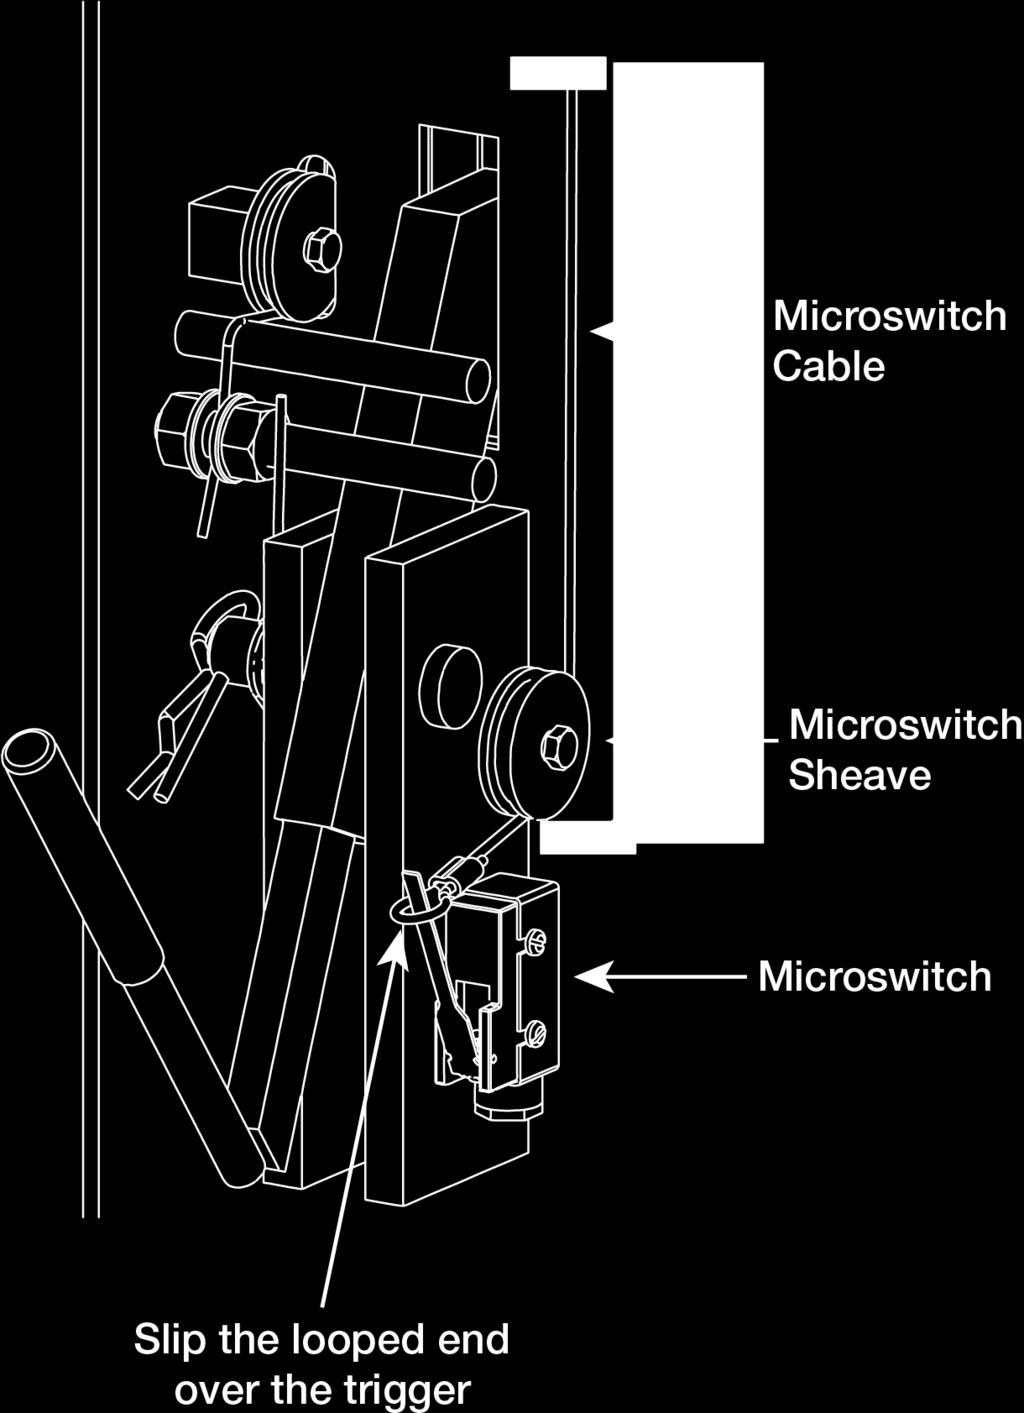 Installing the Microswitch and the Microswitch Cable The Microswitch is the mechanism by which the Trip Stop Tube stops the lift, if necessary. To install the Microswitch Cable and the Microswitch: 1.